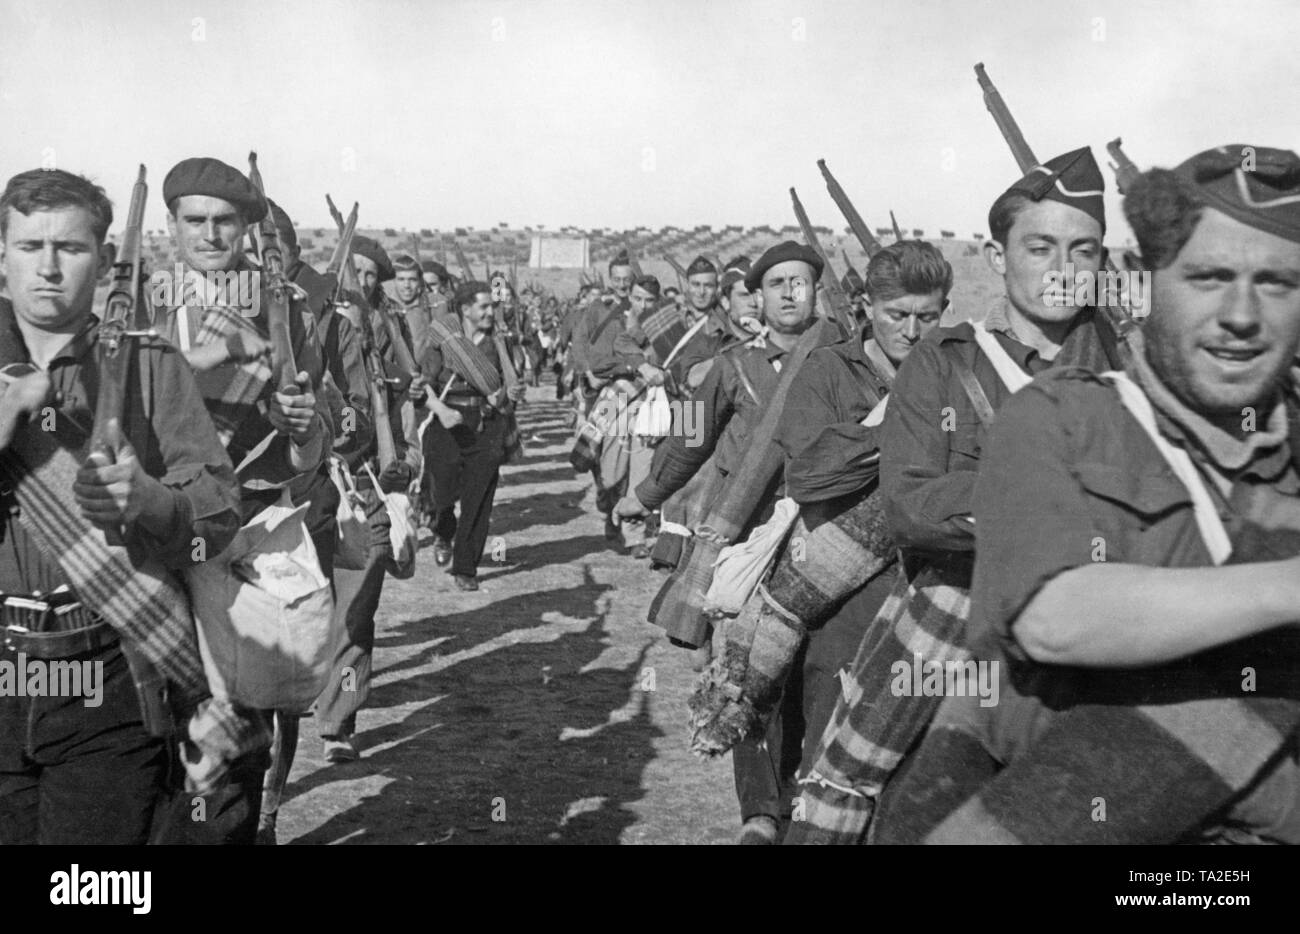 Photo of volunteers of the Falangists during an exercise in the Spanish Civil War in 1937. The soldiers wear the blue shirts of the Fascist Party of Spain, Falange Espanola. They are armed with carabiners and carry field pack. Stock Photo